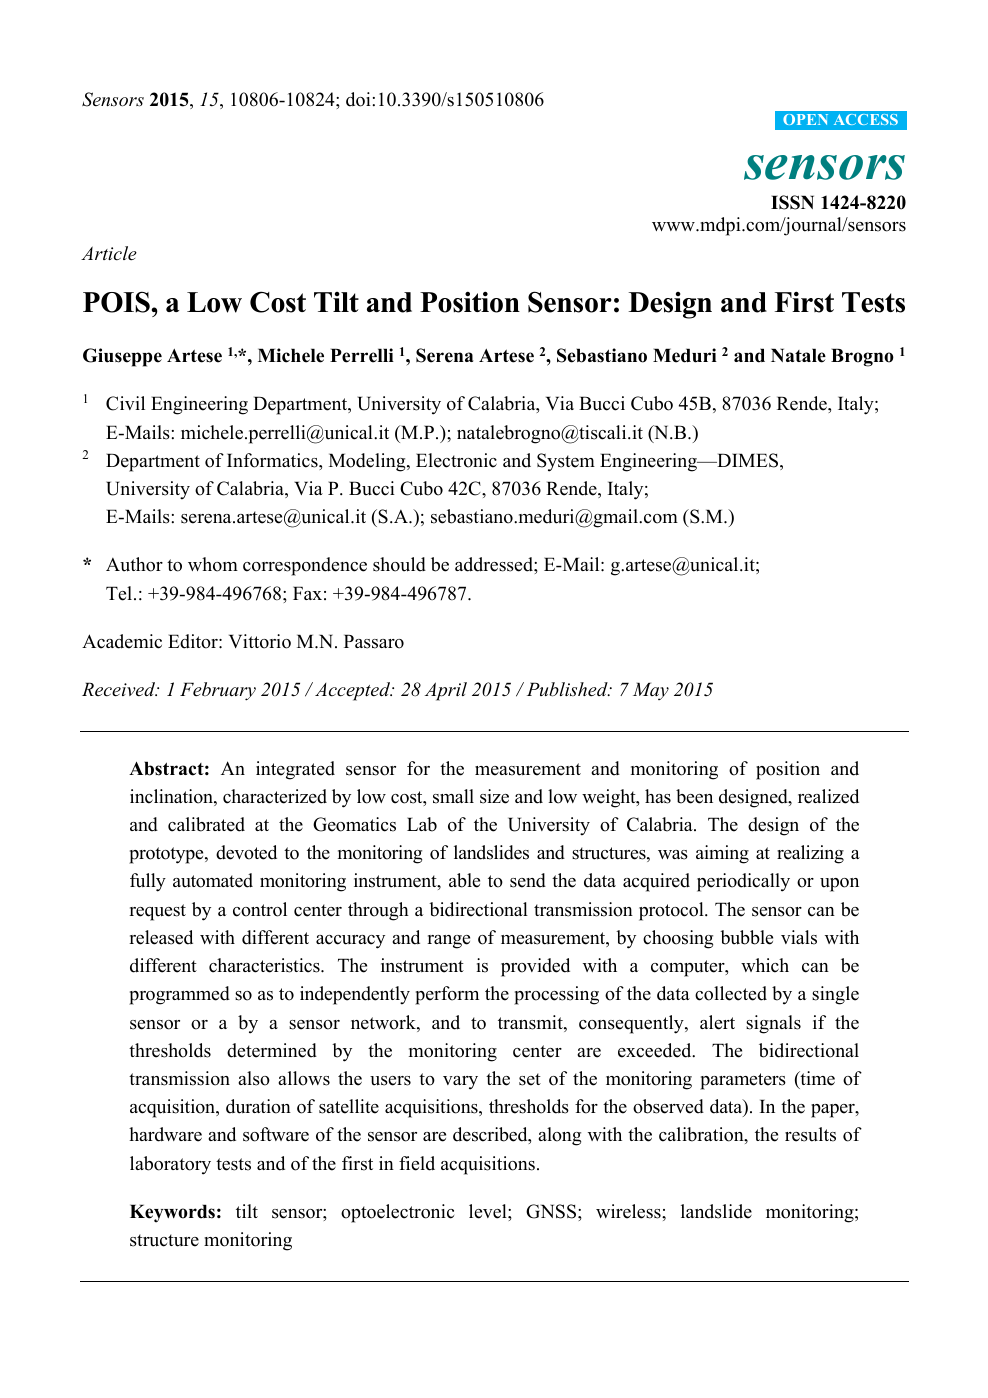 Immagini Natalizie 192 Pixel.Pois A Low Cost Tilt And Position Sensor Design And First Tests Topic Of Research Paper In Chemical Sciences Download Scholarly Article Pdf And Read For Free On Cyberleninka Open Science